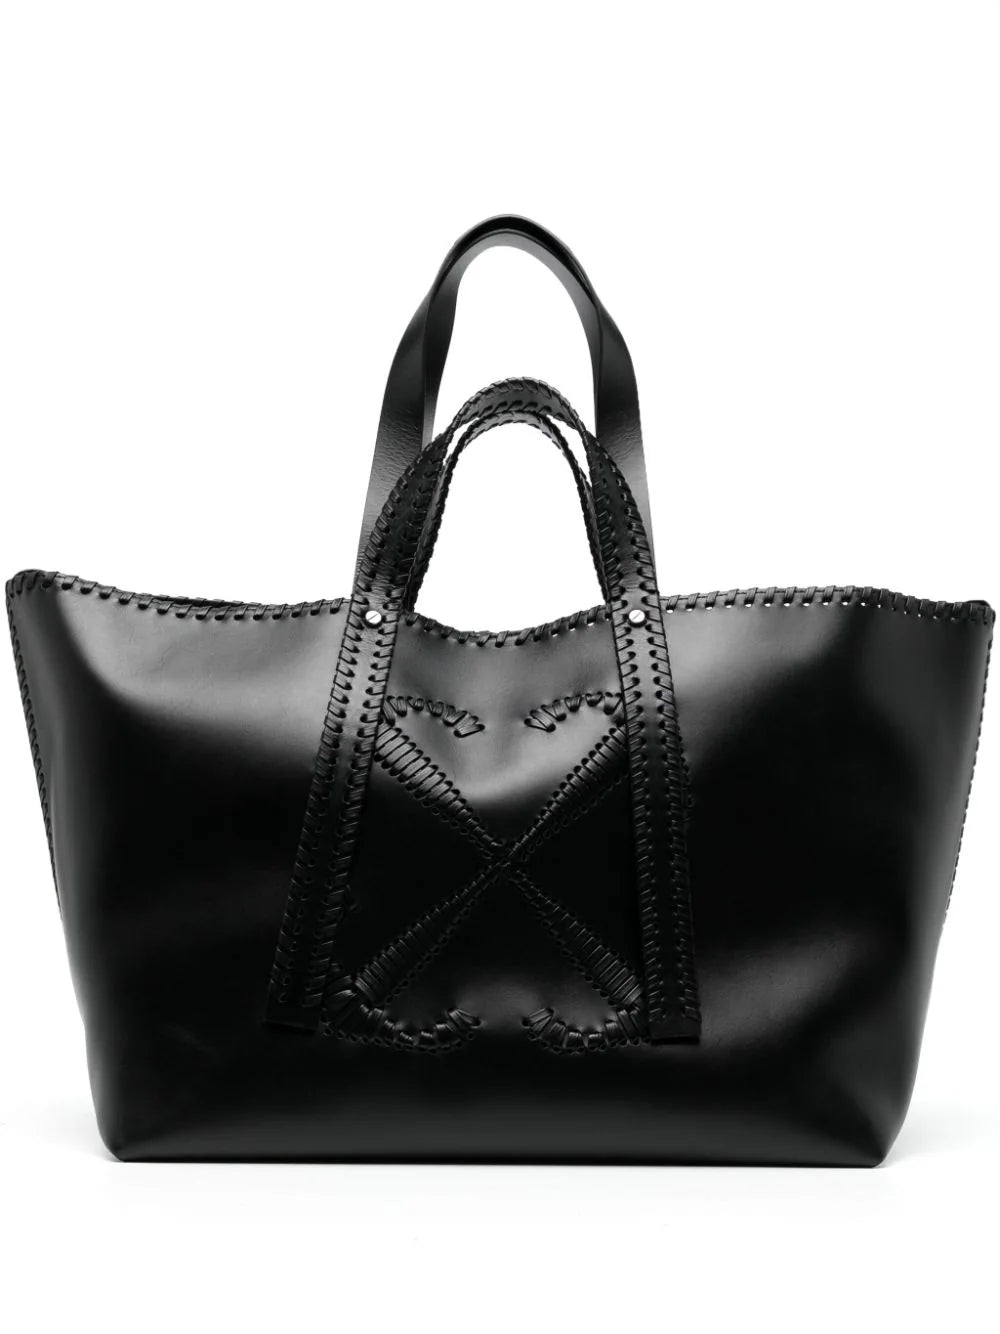 Day Off leather tote bag